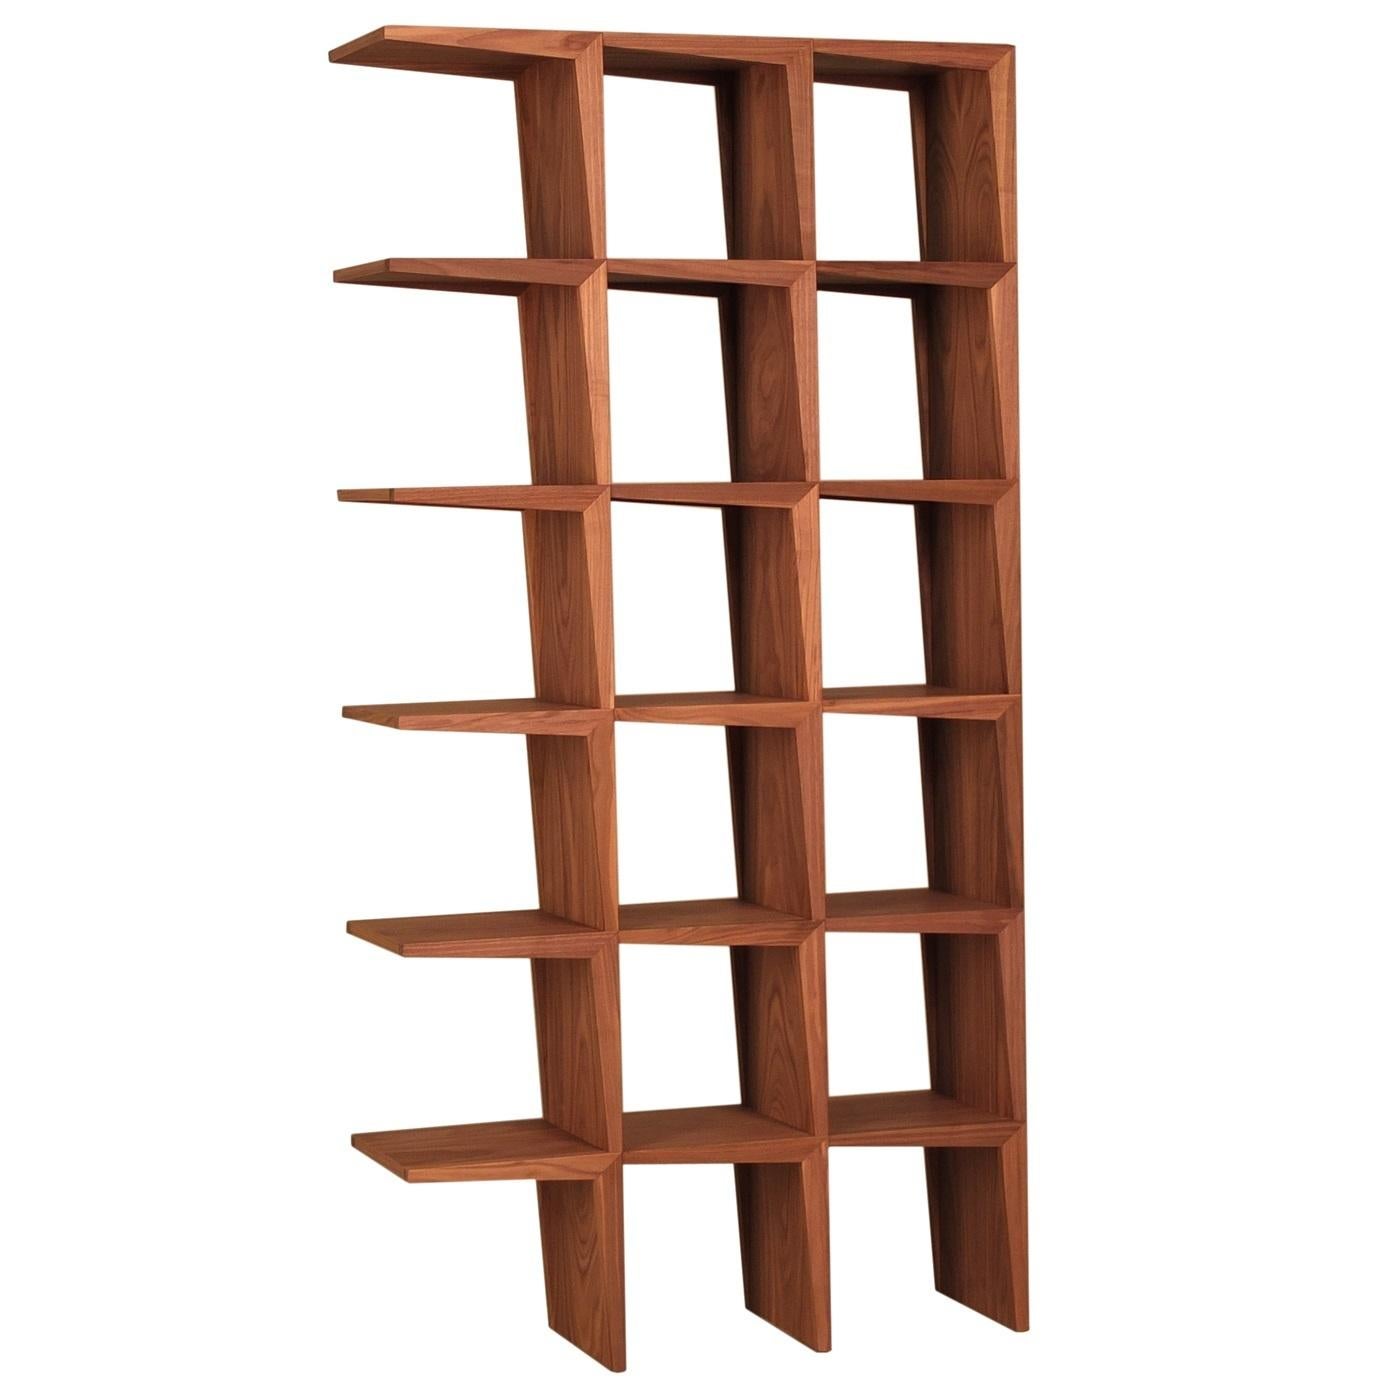 Designed by celebrated Israeli architect Itamar Harari, this walnut bookcase can be used on both sides, making this a sophisticated and modern room divider as well. The unique Silhouette that leaves one side opened, allows for the combination of